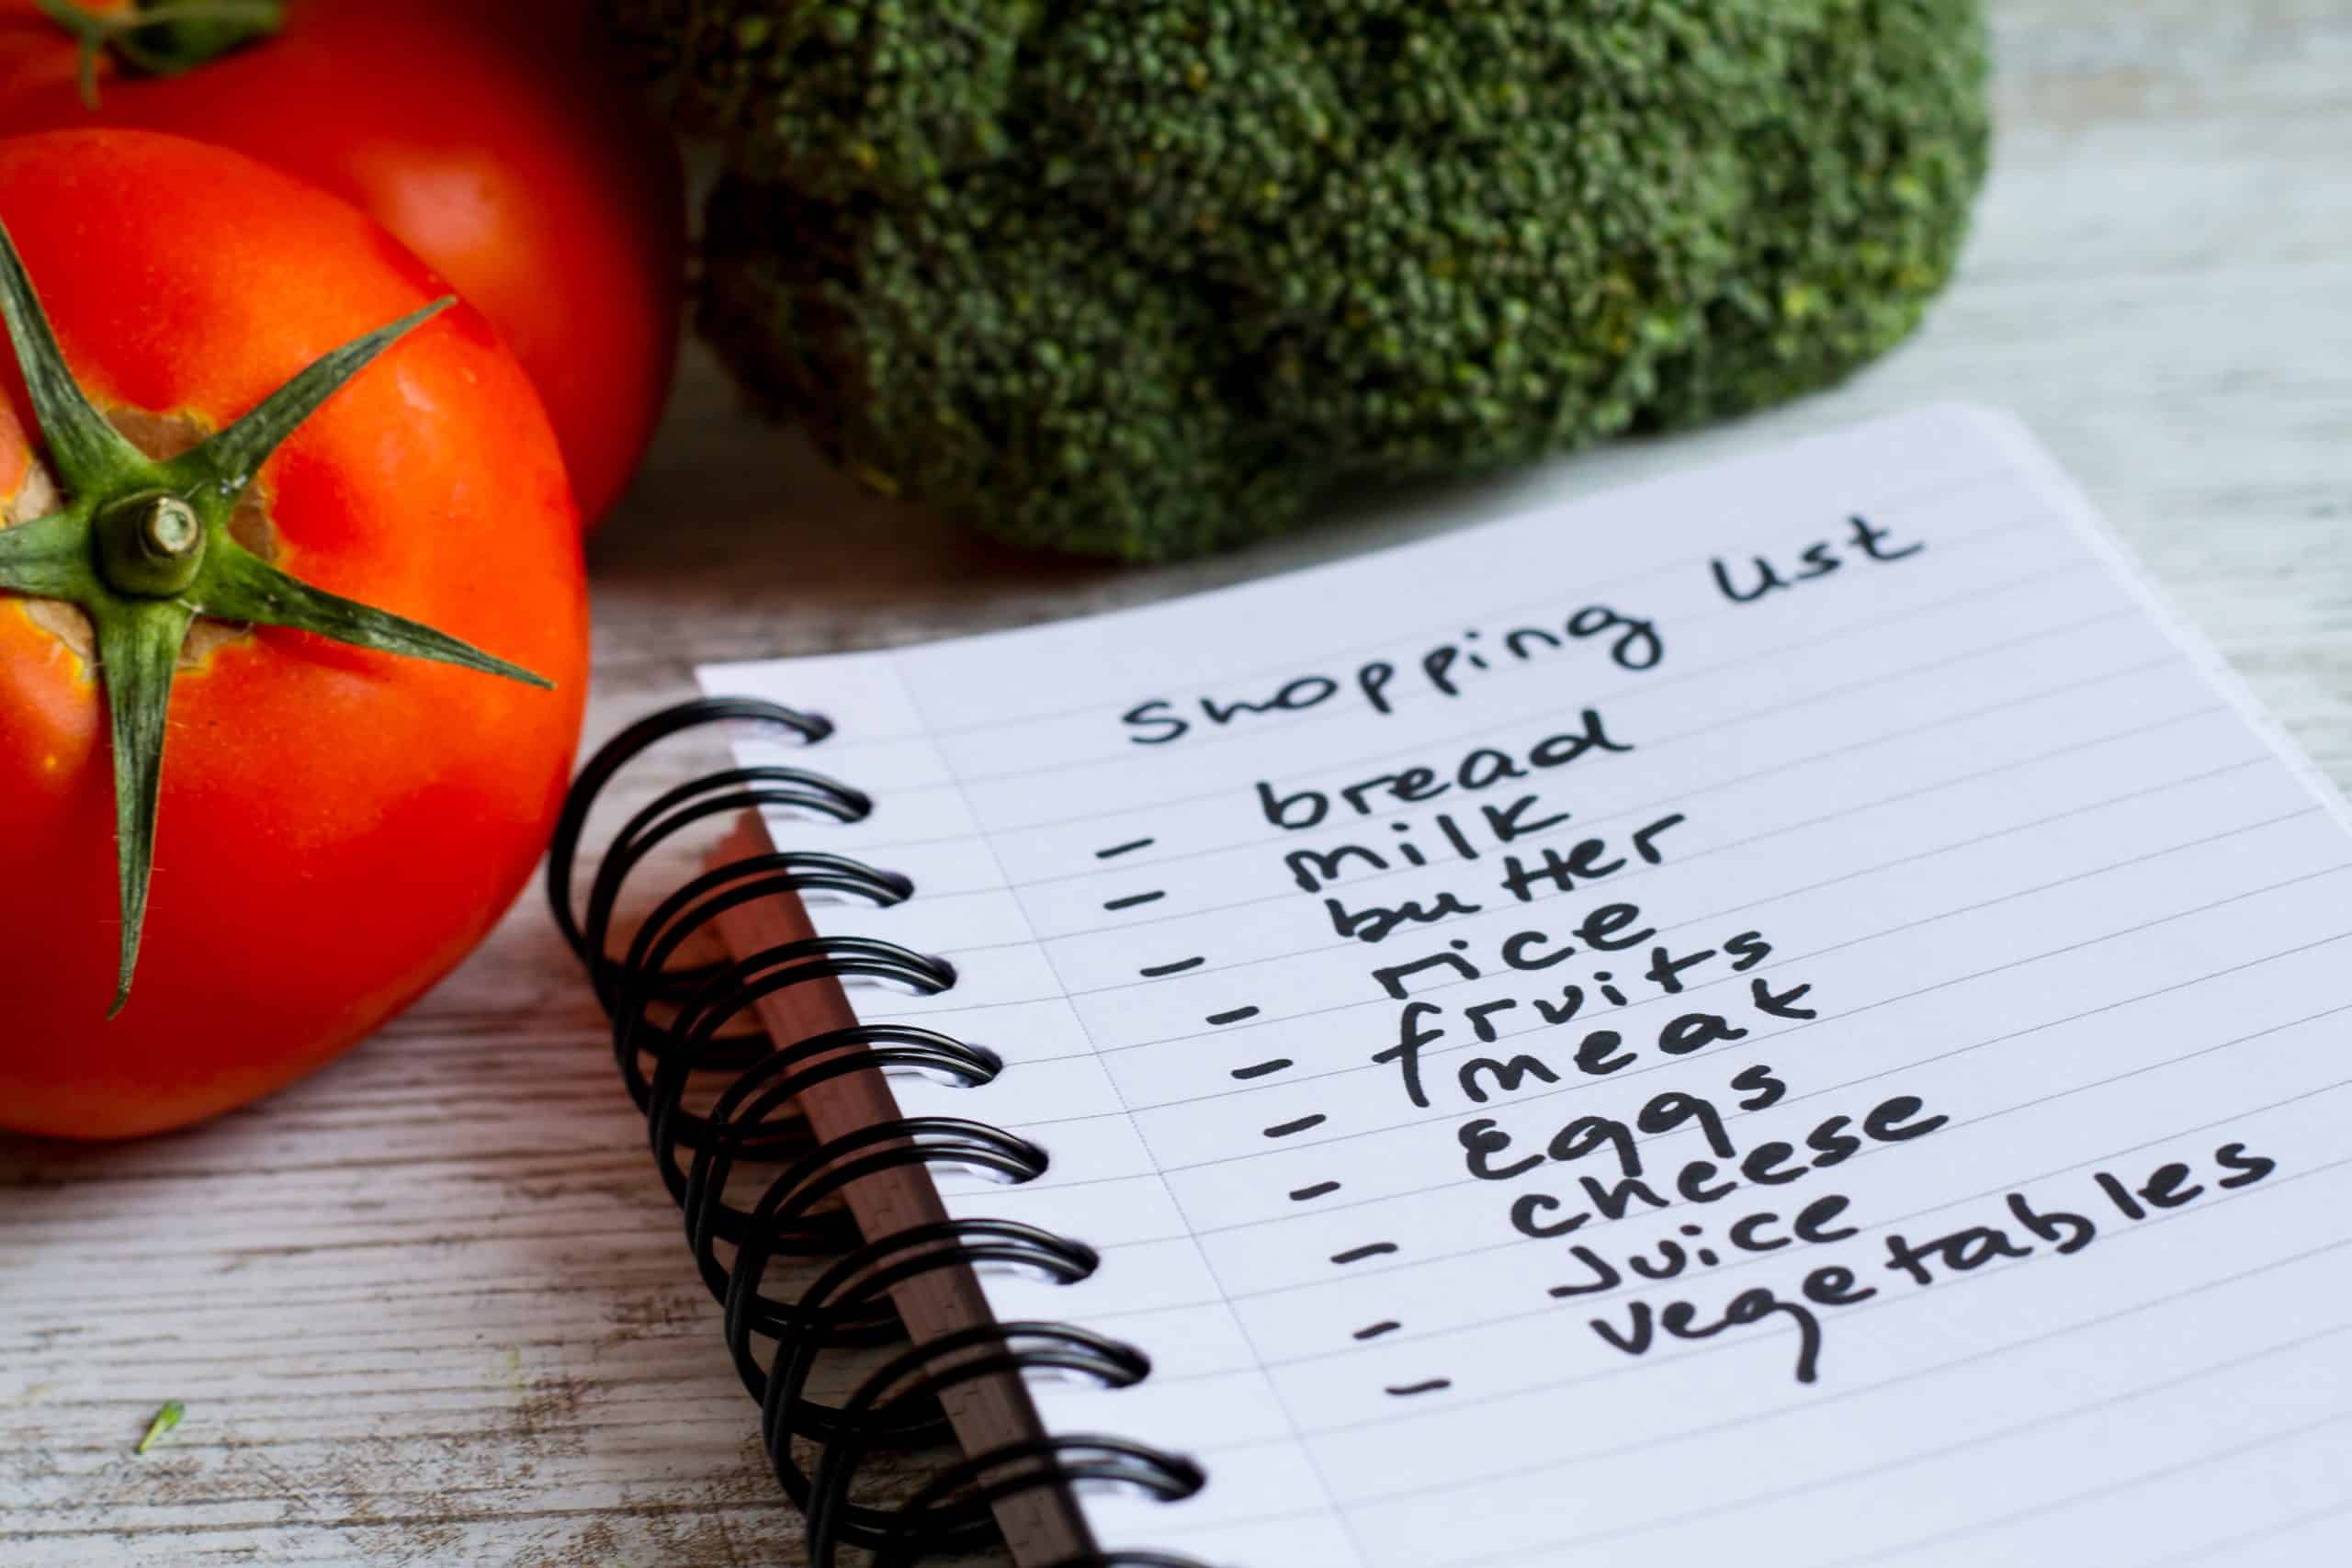 Red tomatoes and green broccoli next to shopping list written in a small notebook